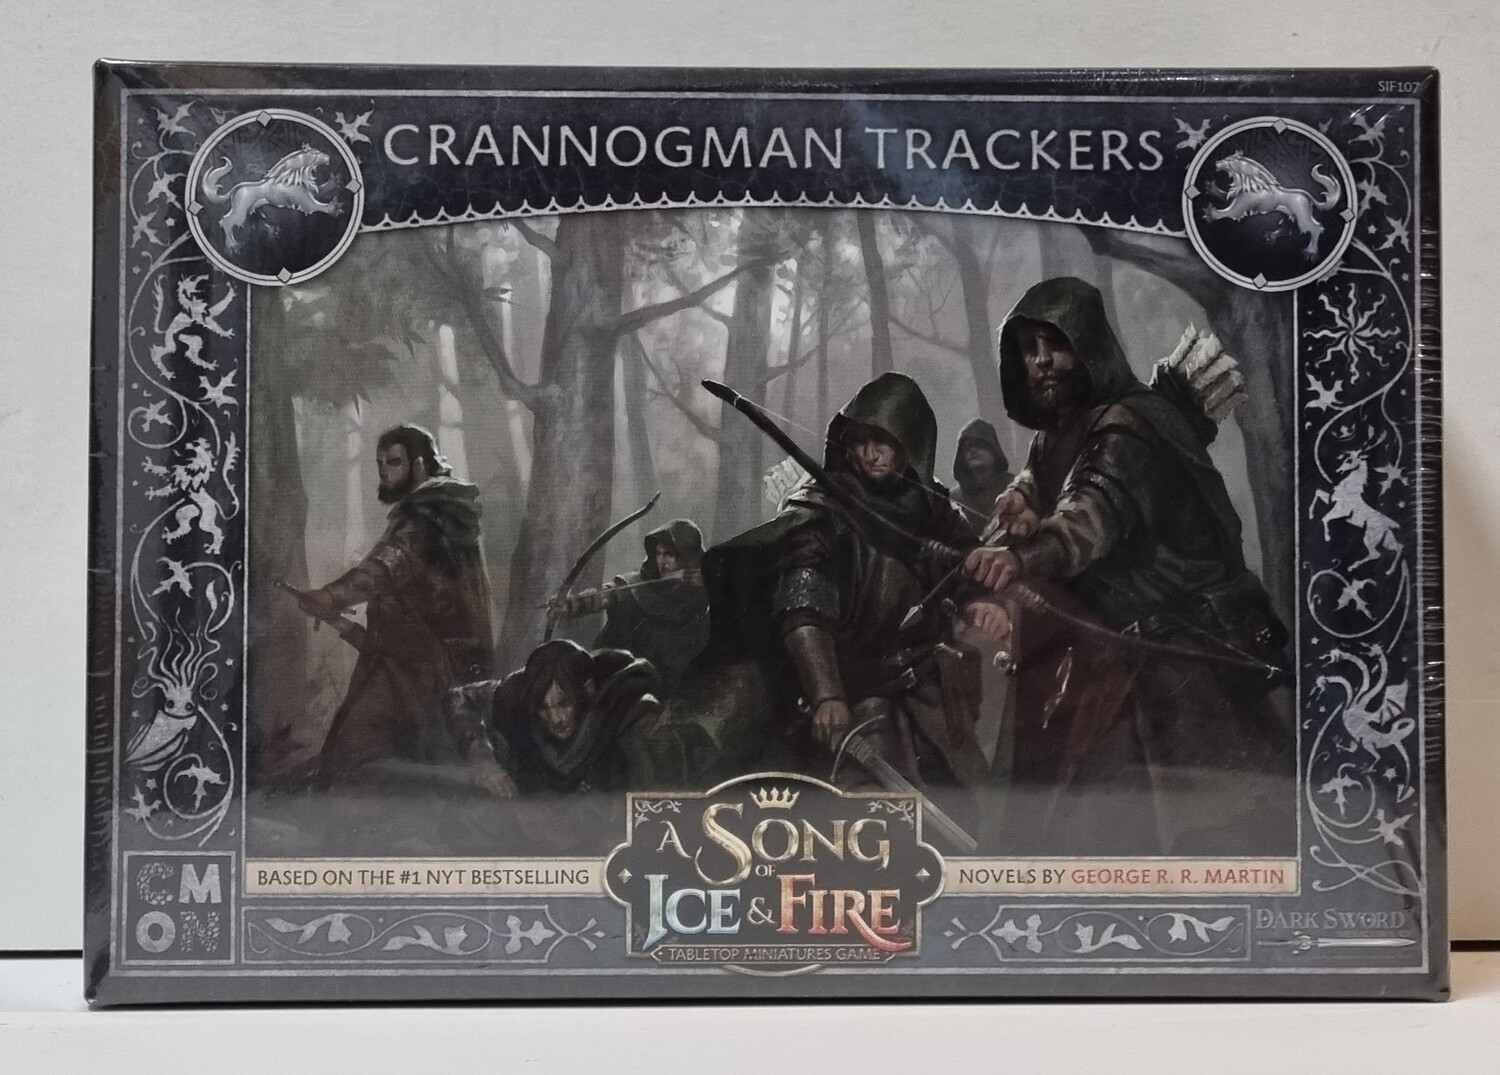 A Song of Ice & Fire, SIF107, Crannogman Trackers